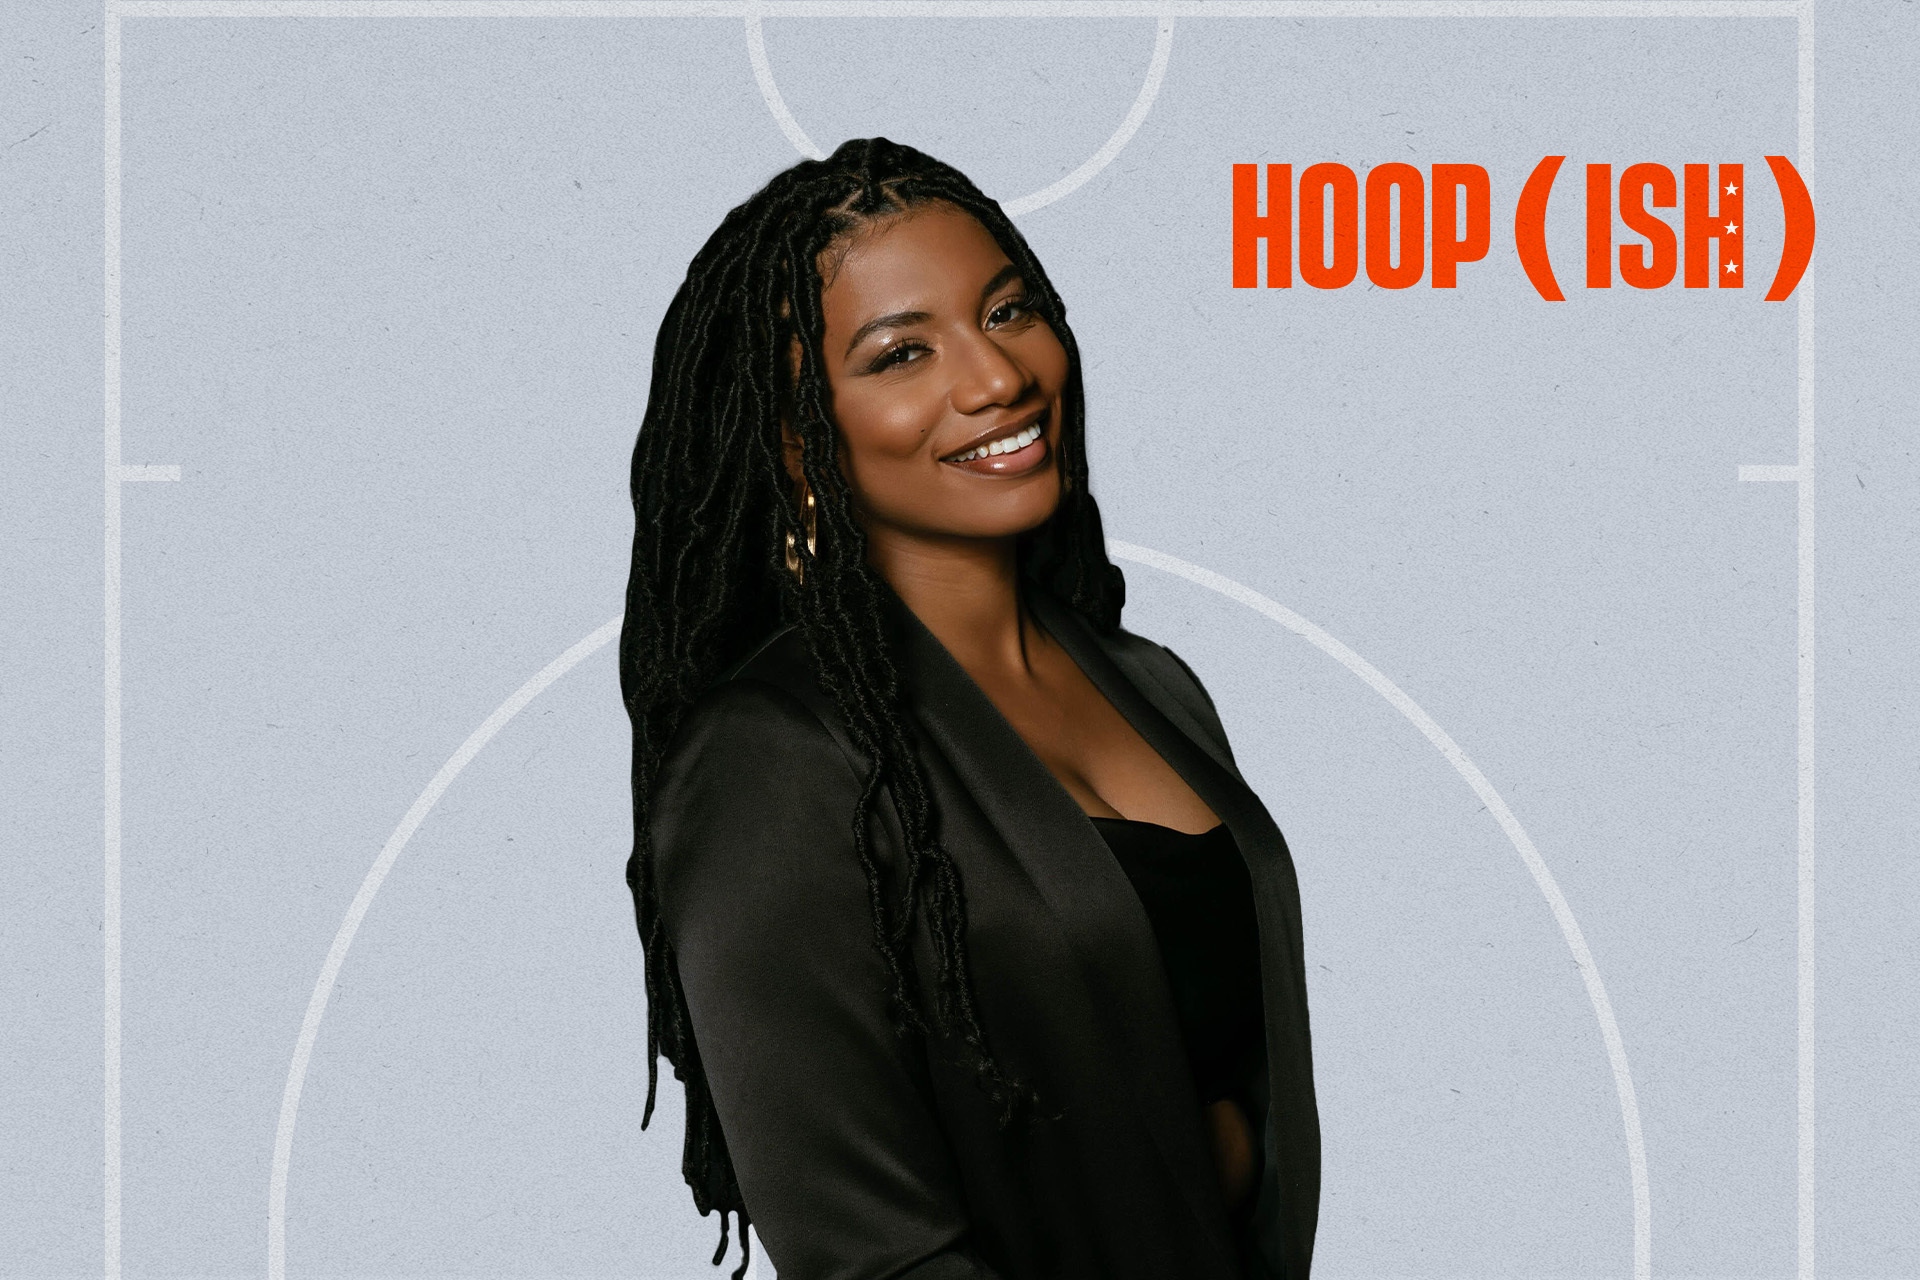 Taylor Rooks Reveals Who She Thinks are the Best Dressed Players in the NBA are on the hoop(ish) Podcast